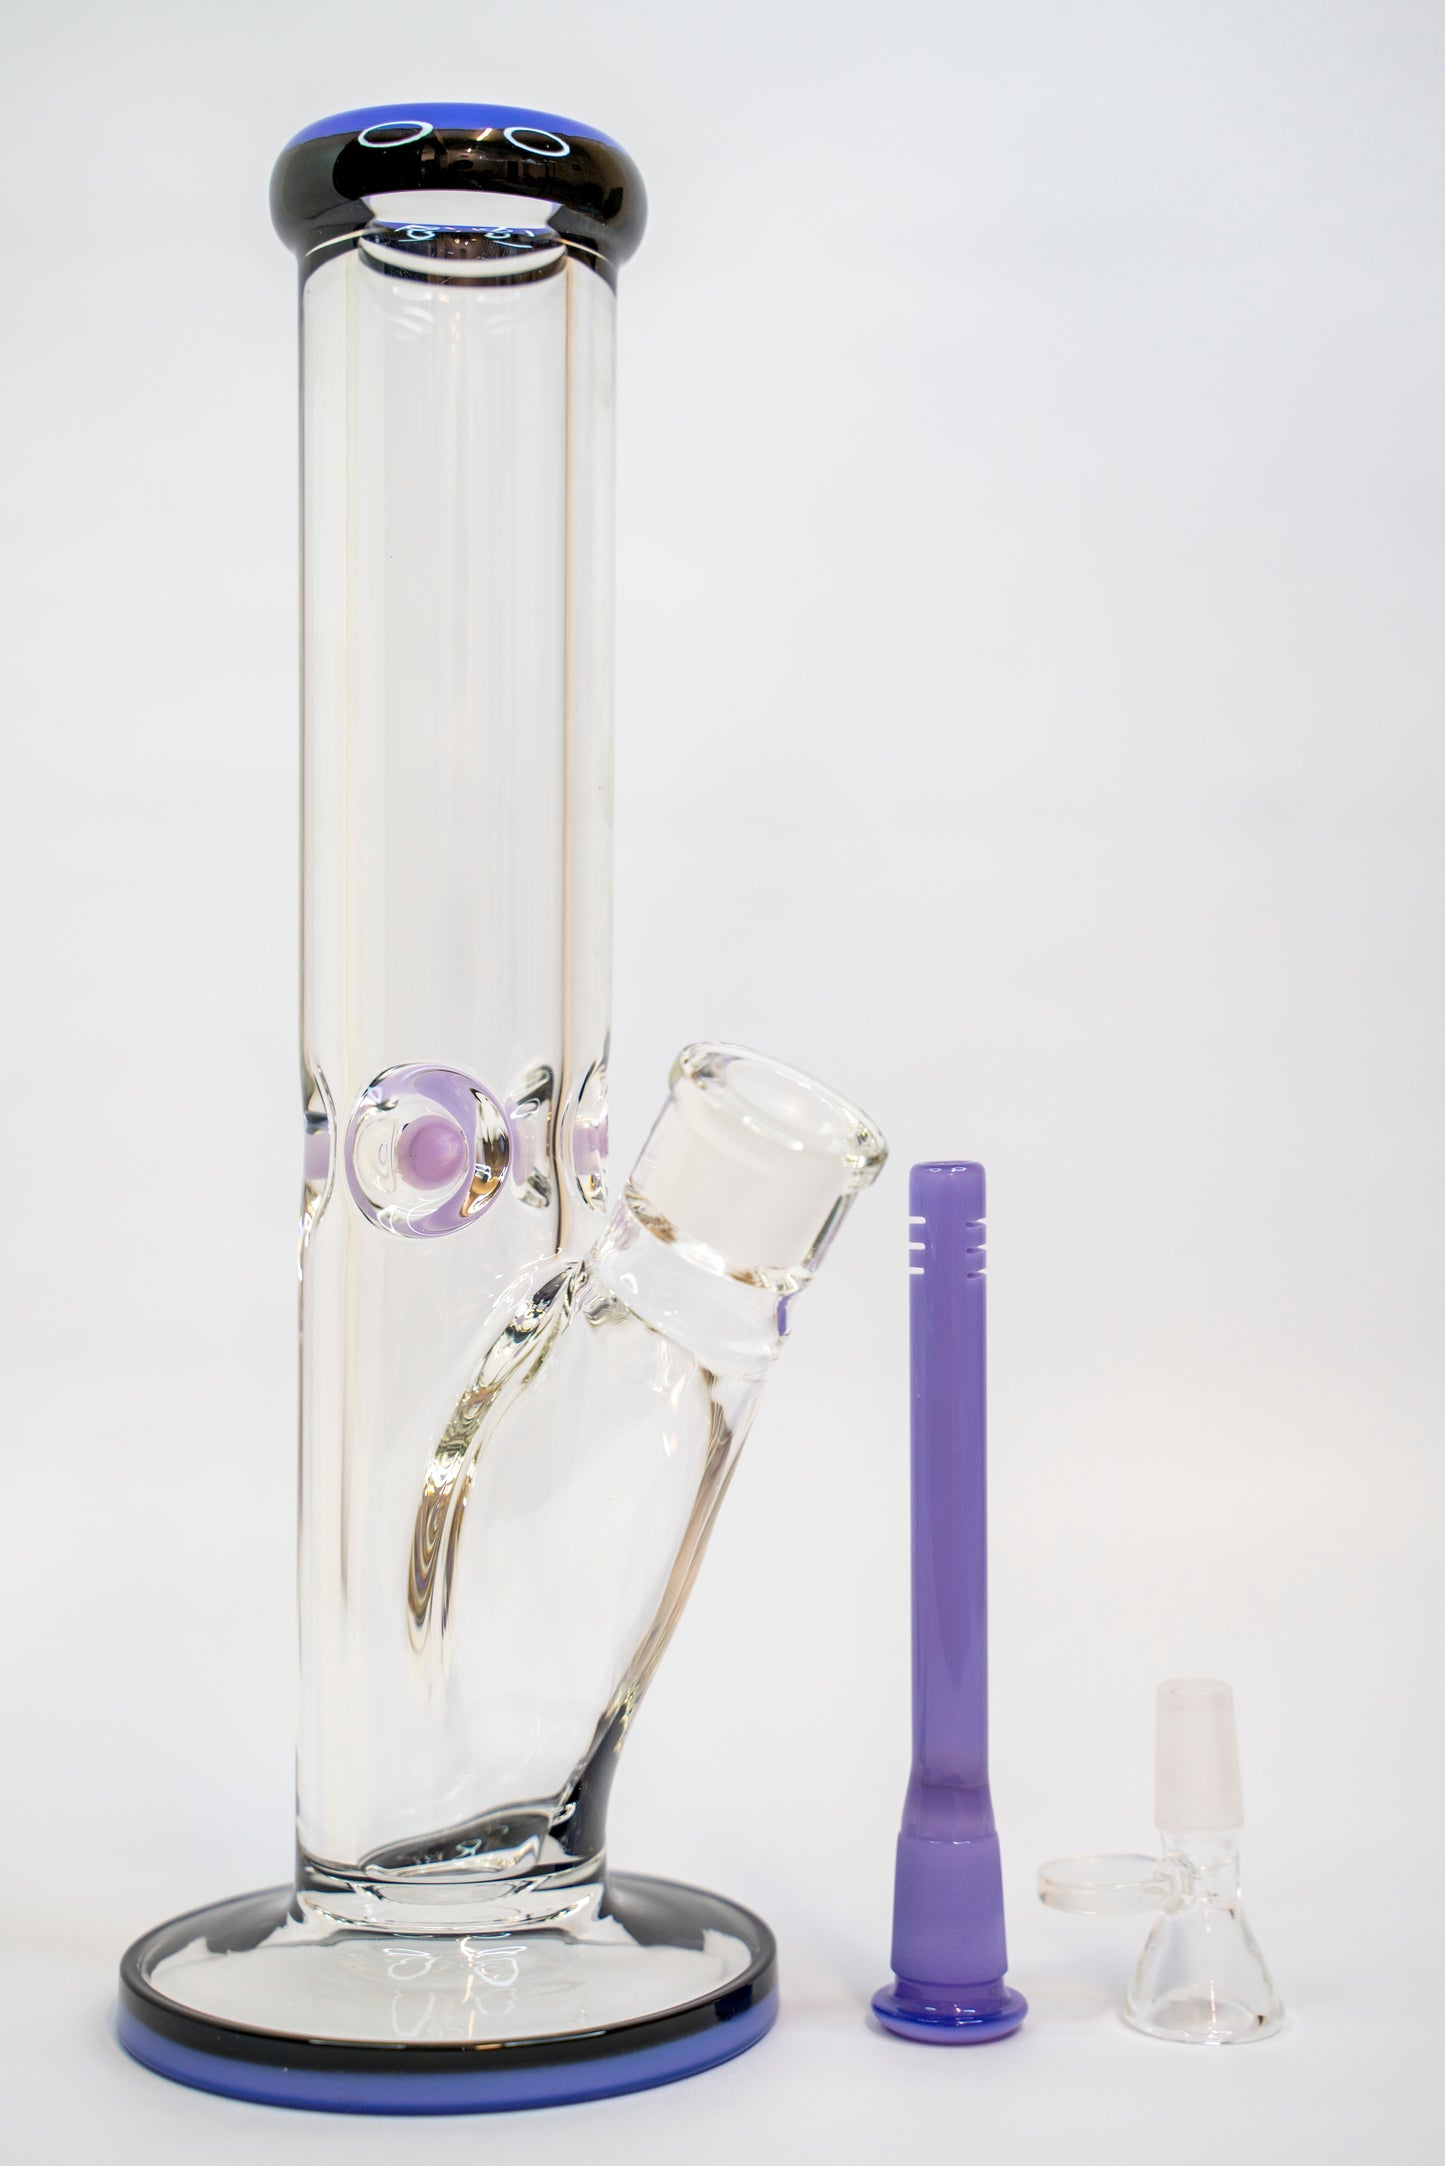 30cm Clear Straight Pipe with Coloured Mouthpiece and Diffuser